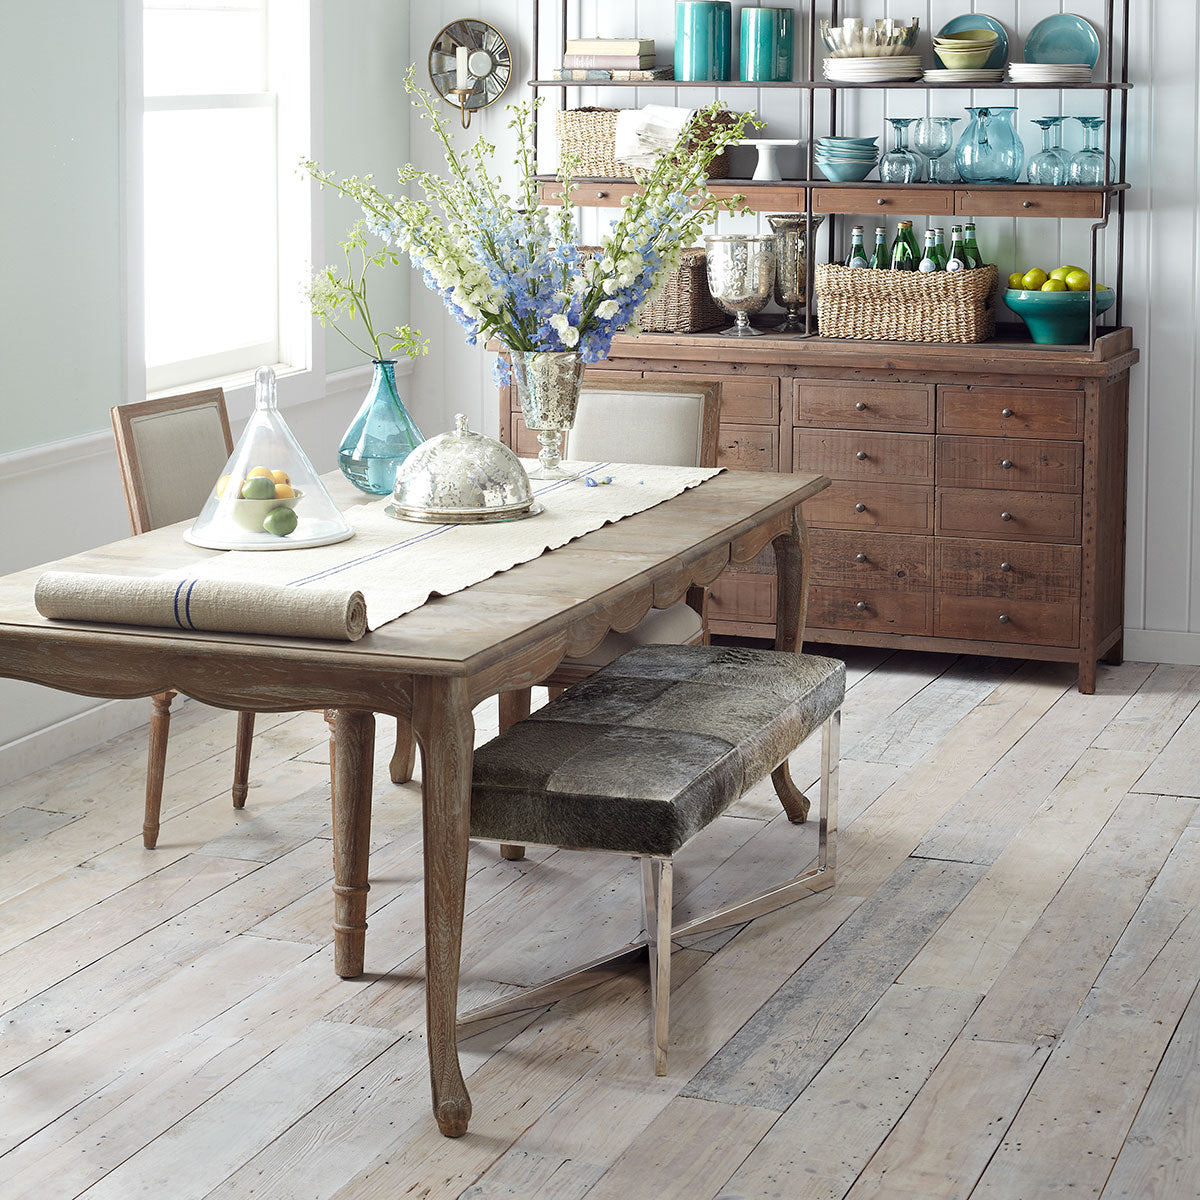 French Country Dining Table - Weathered in a Dining Room Setting: Standing on a Parquet Floor